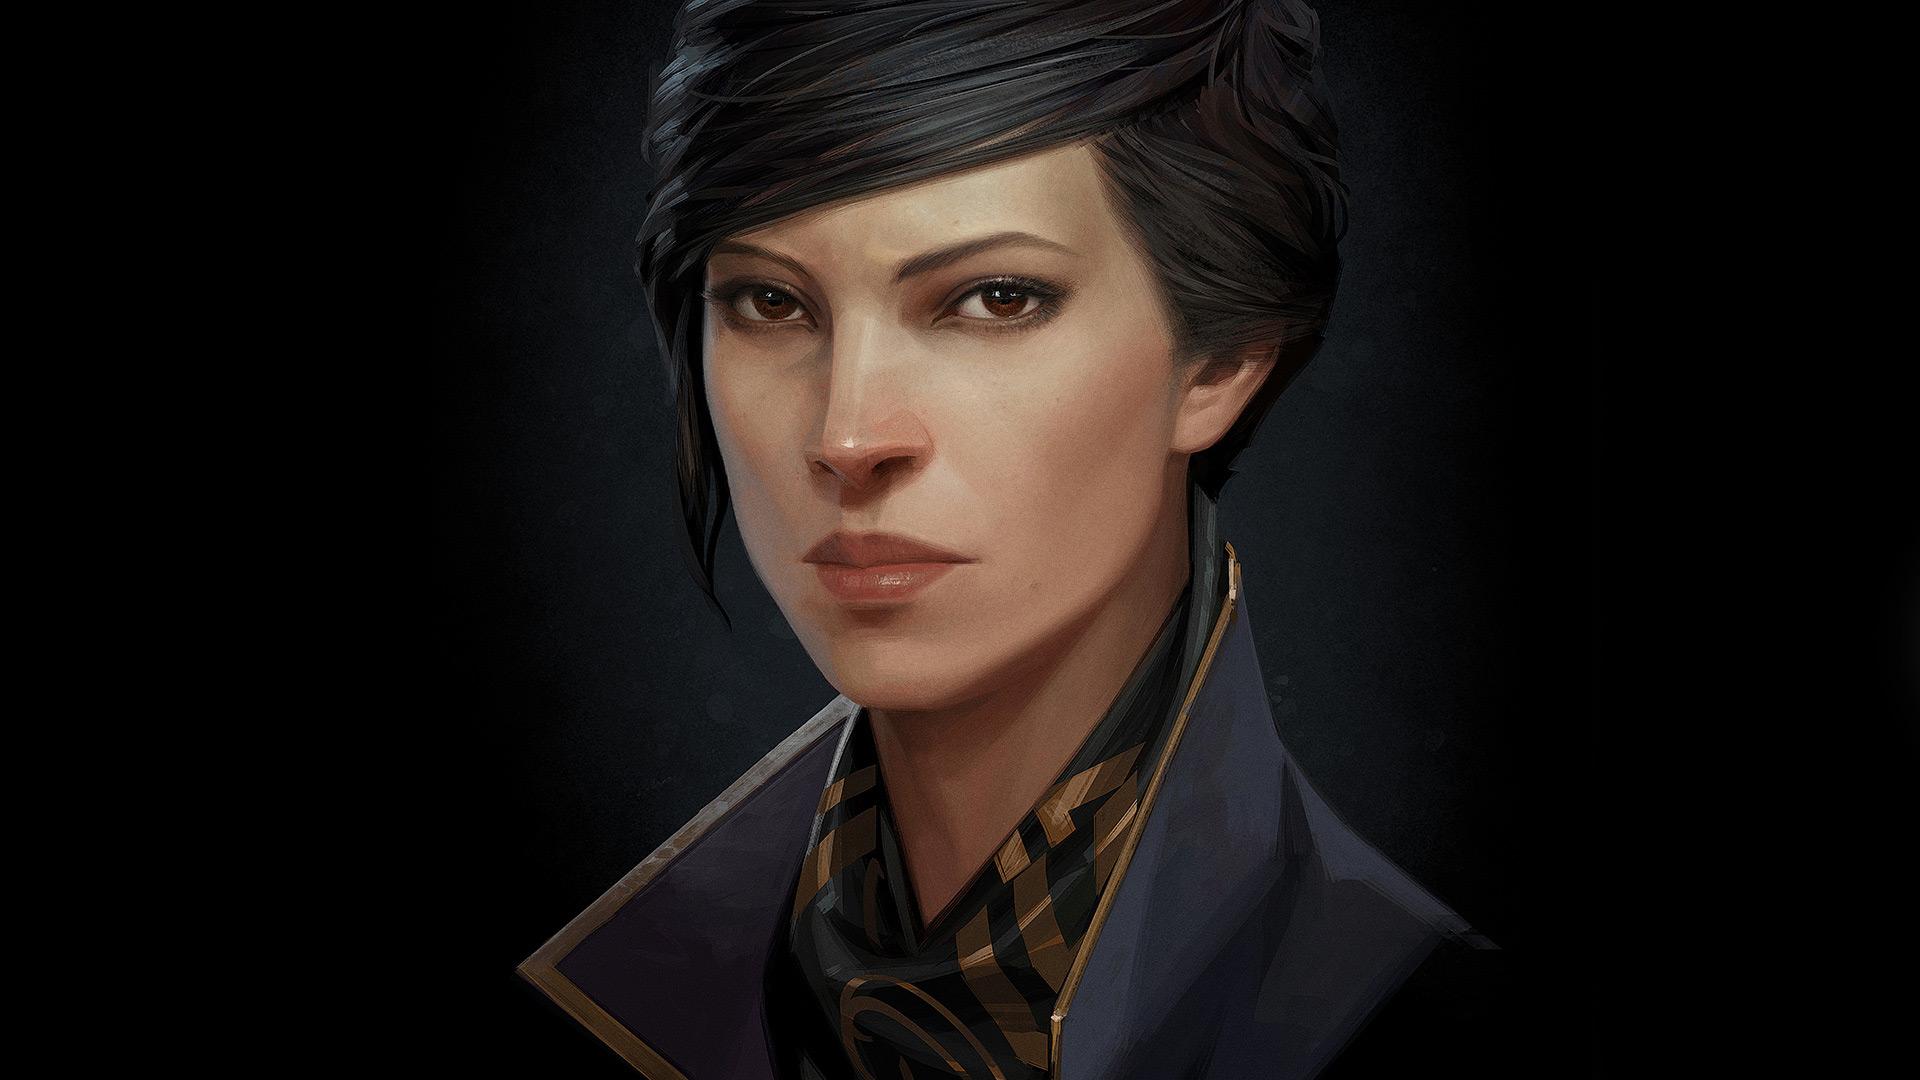 Emily Kaldwin's portrait. Wallpaper from Dishonored 2